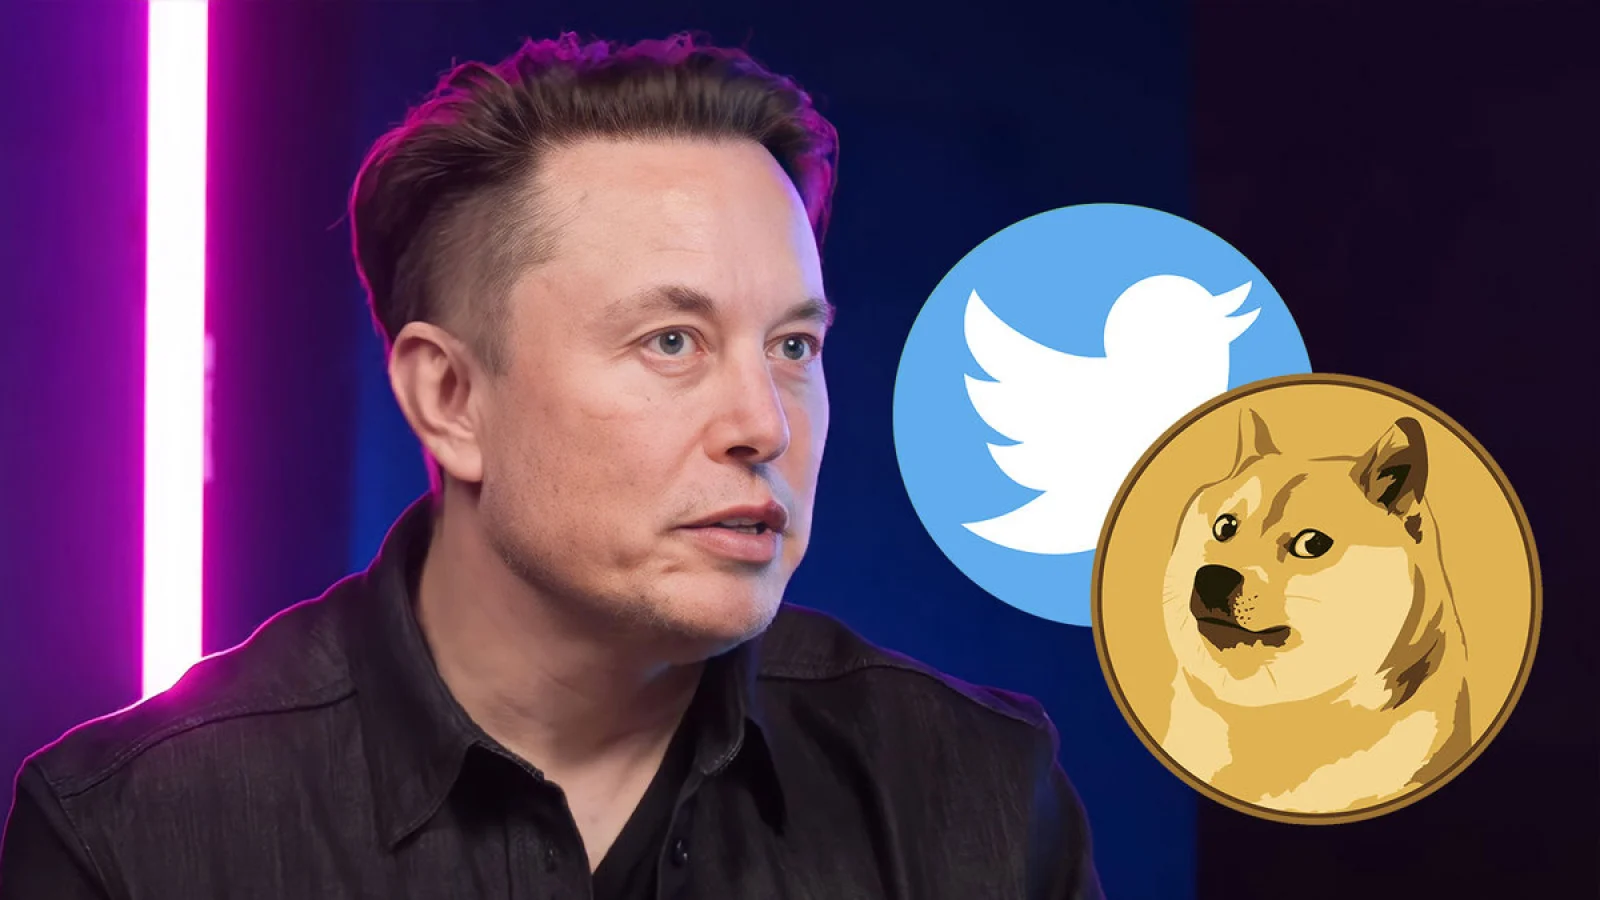 Elon Musk's Twitter Icon Switches to Doge Meme